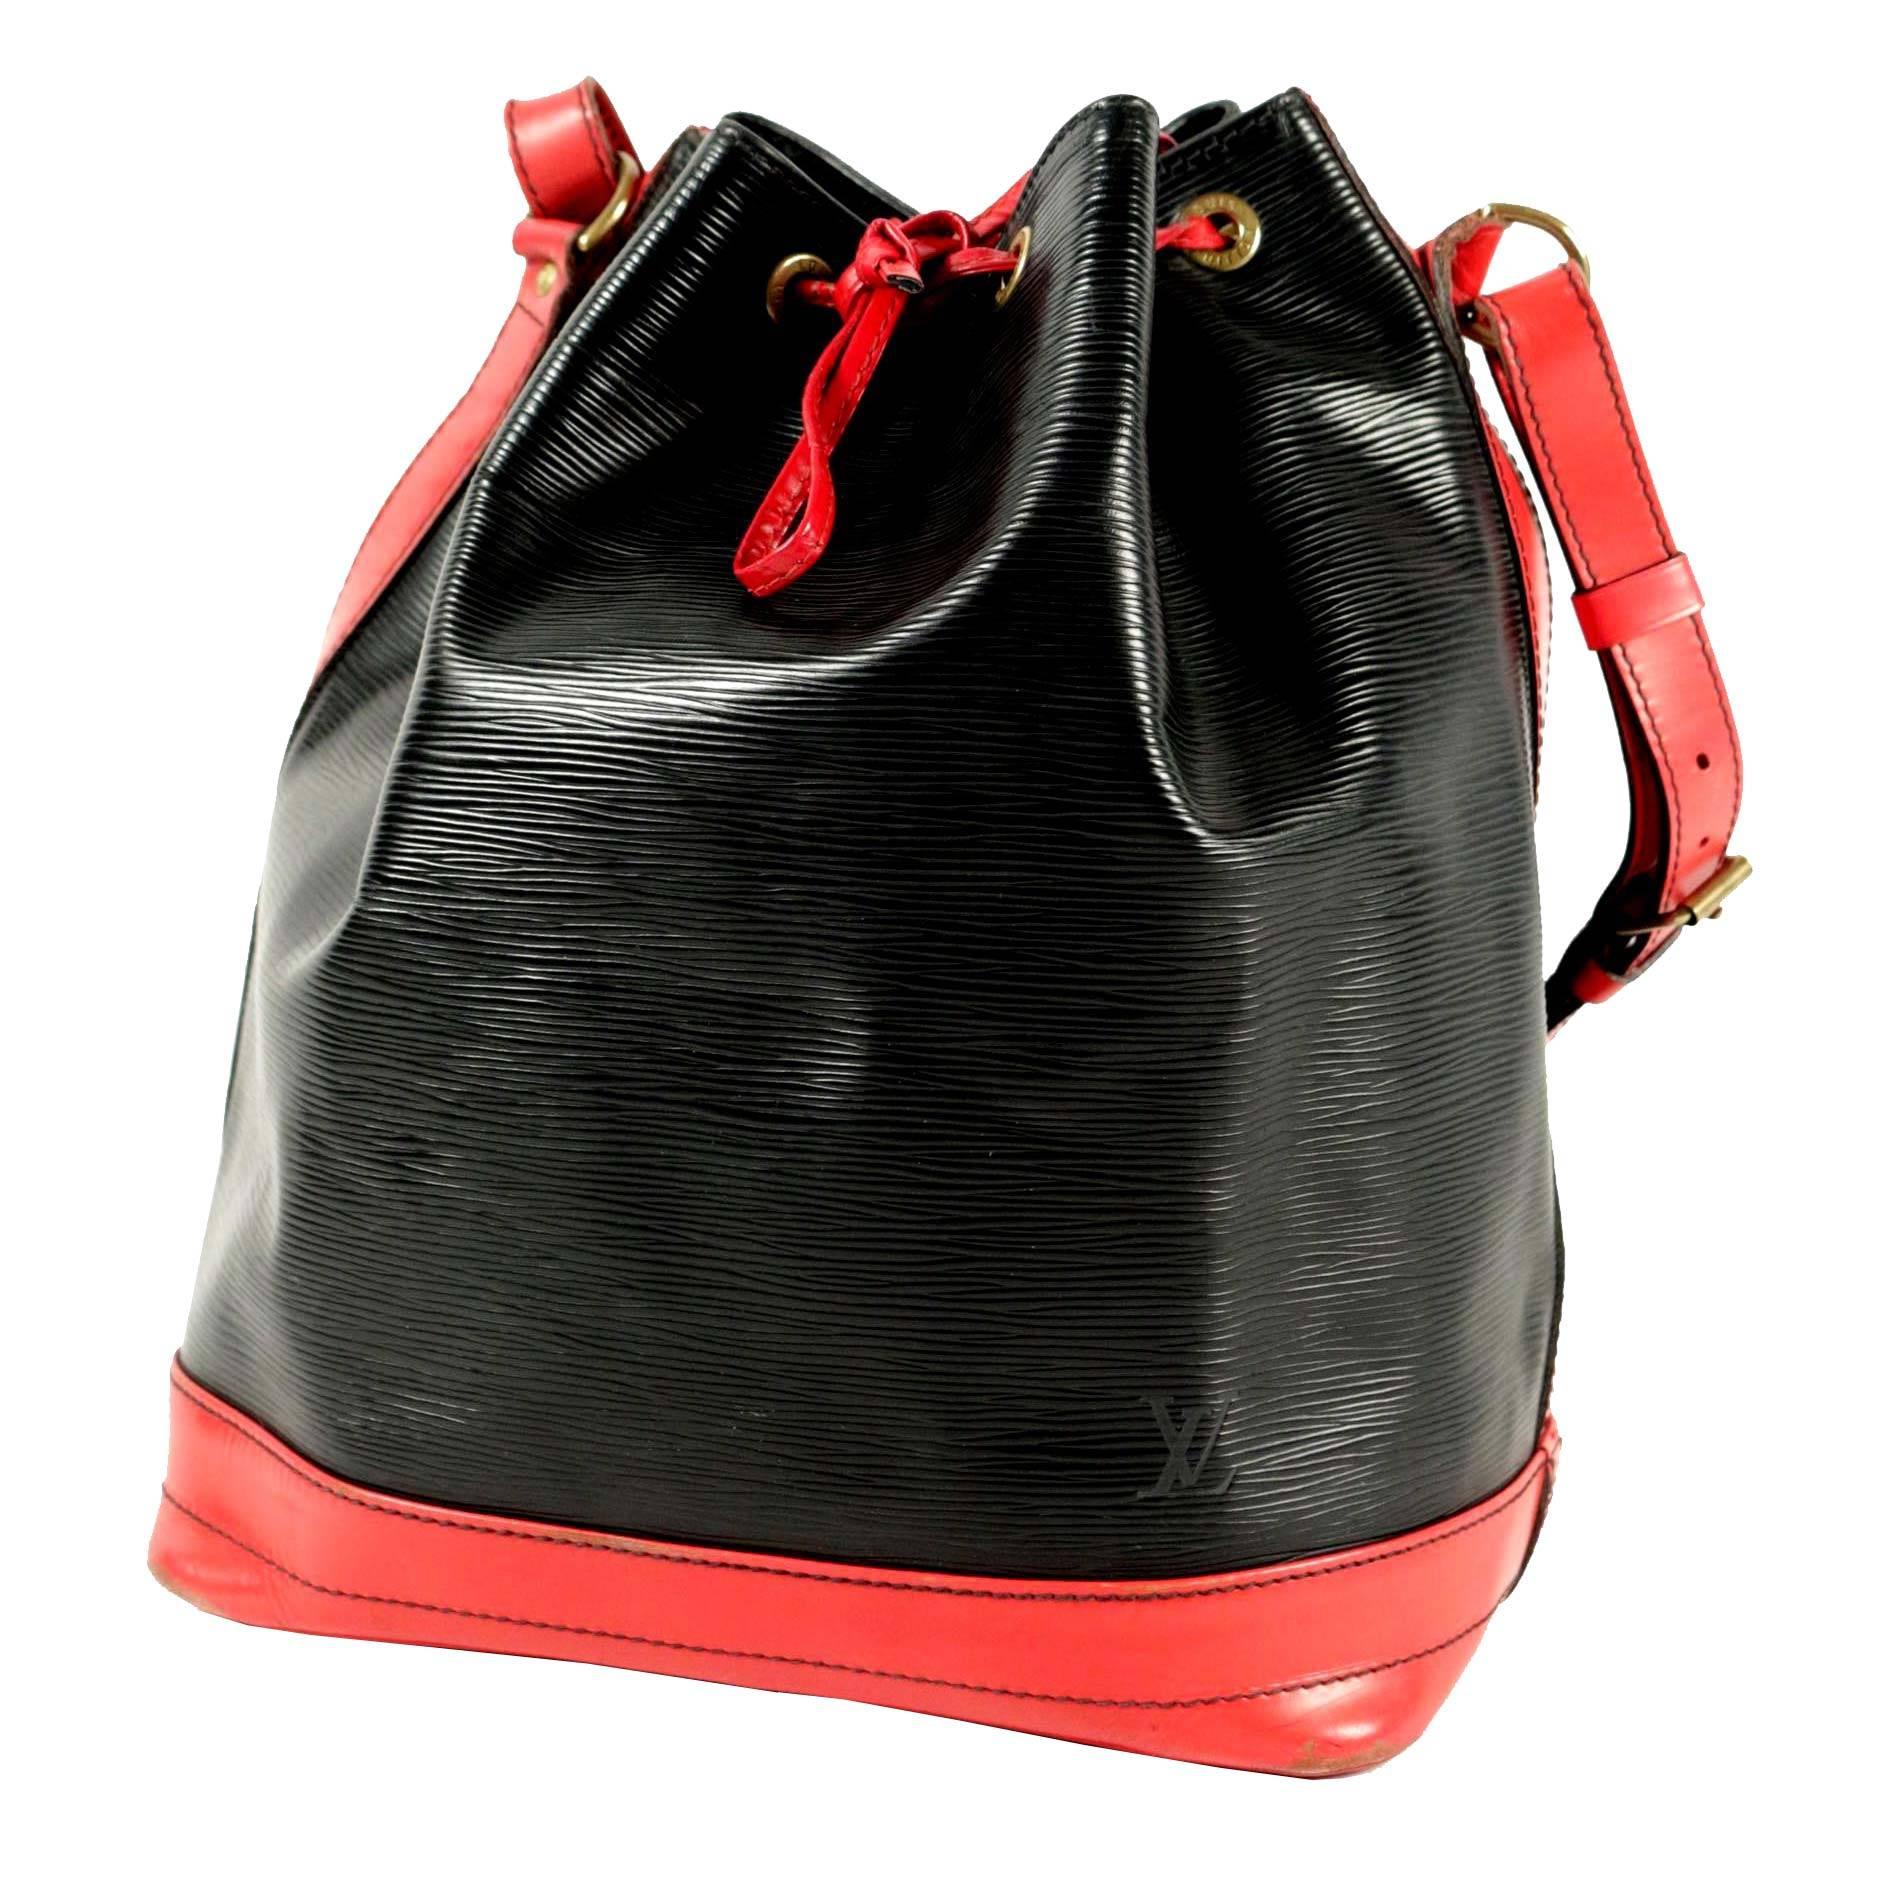 Vintage Louis Vuitton Grand Noe Bag, Epi Leather, Black and Red